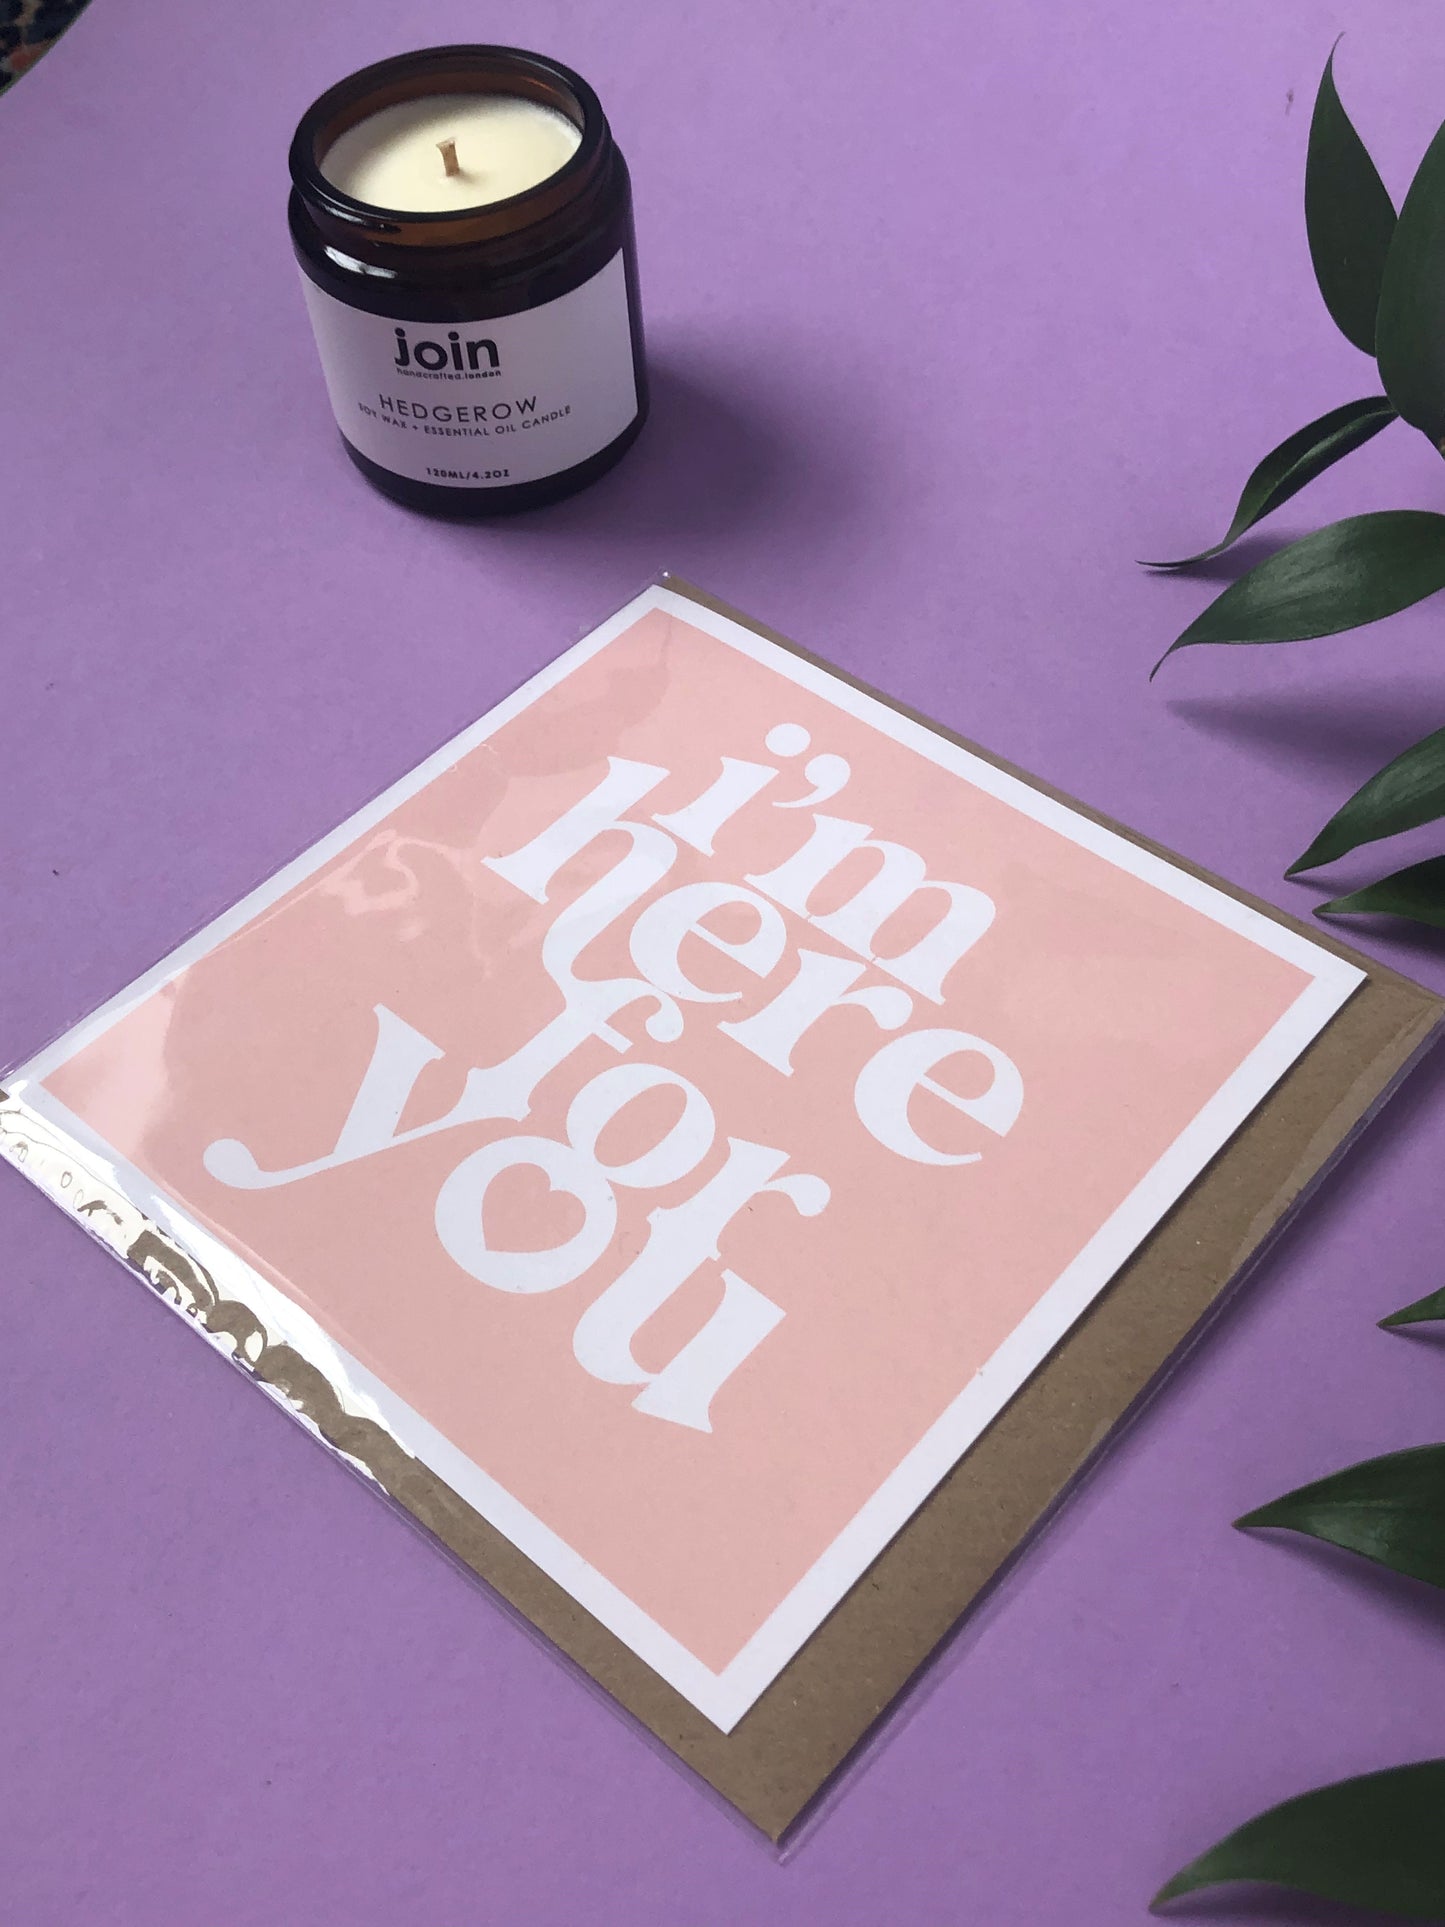 I'm here for you - Positivity Greeting Card